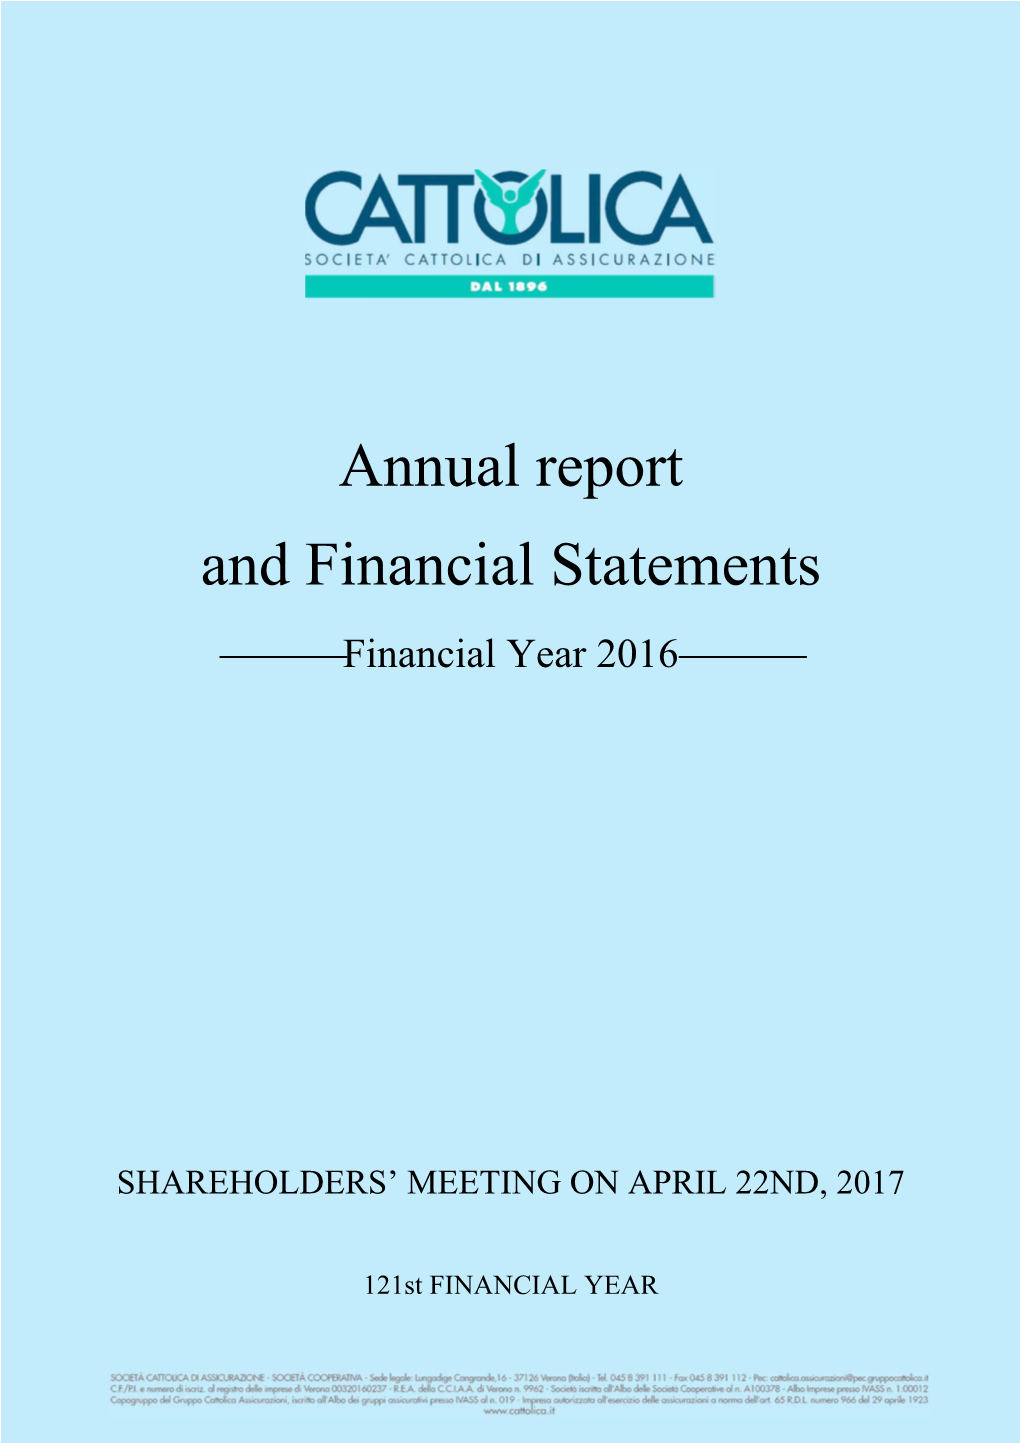 Annual Report and Financial Statements Financial Year 2016